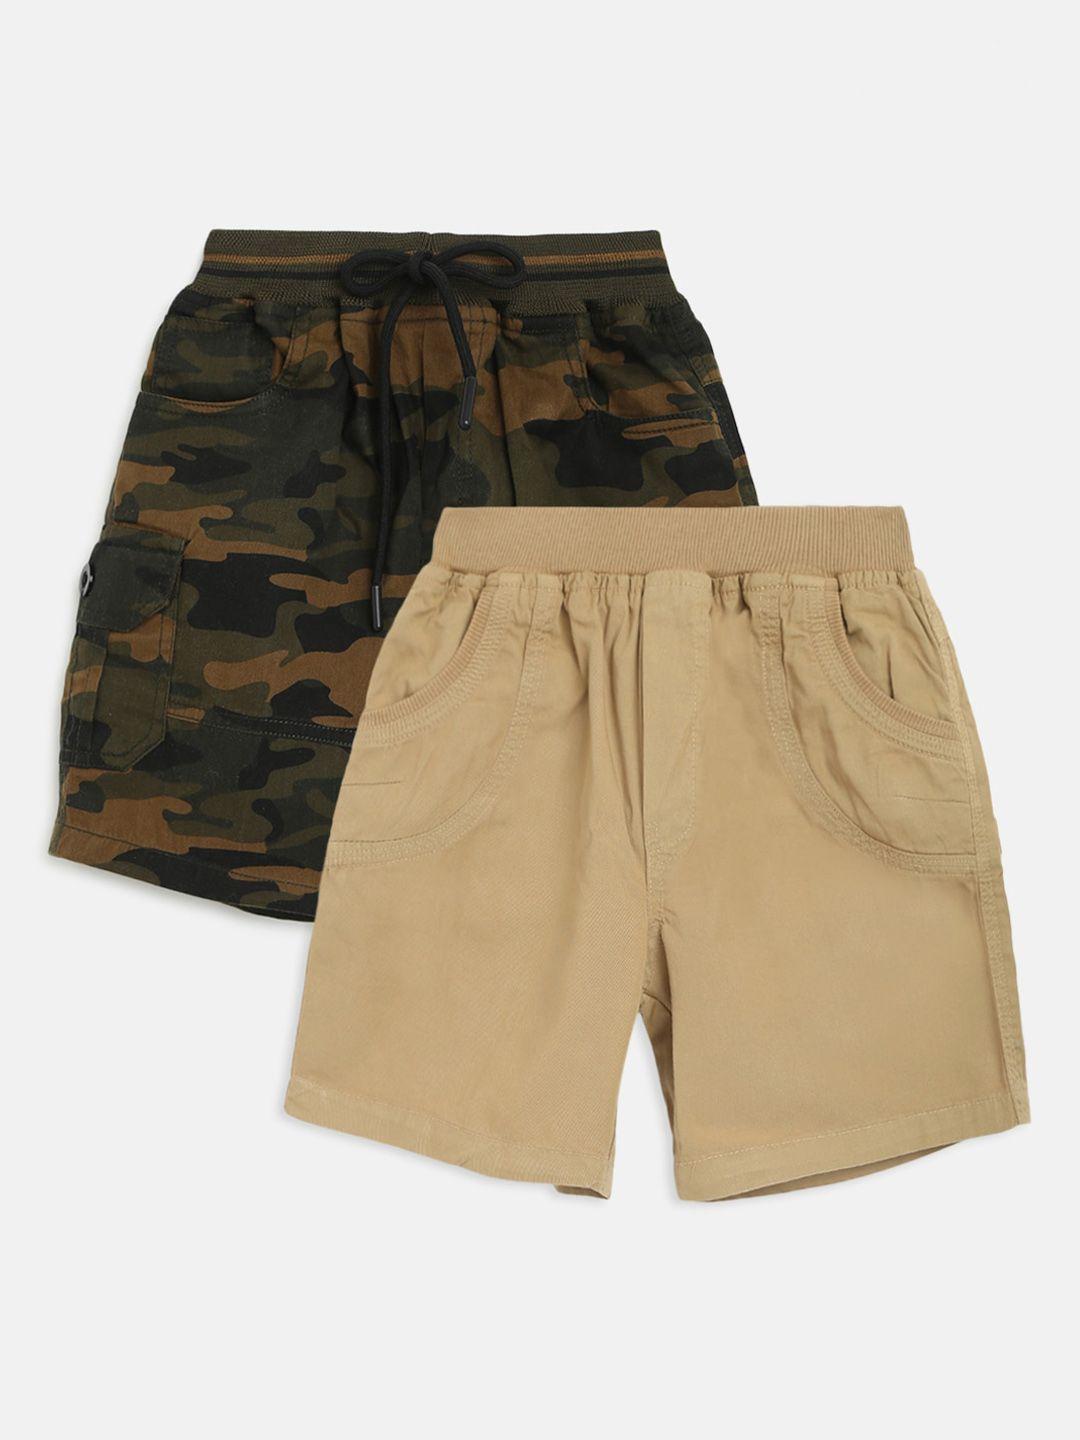 homegrown boys olive green & brown camouflage outdoor shorts